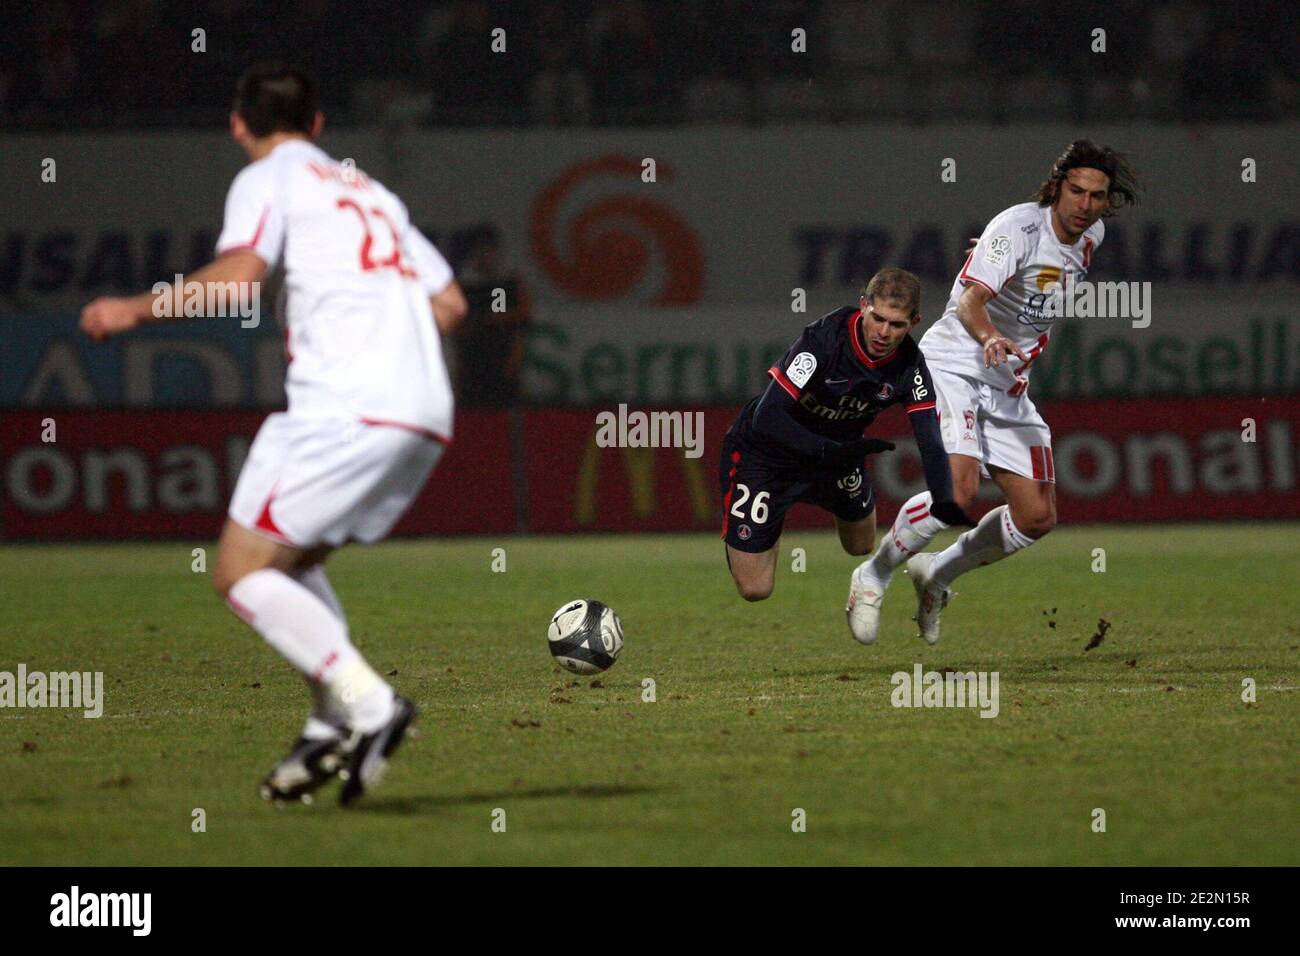 PSG's Christophe Jallet falls during the French First League soccer match, AS Nancy Lorraine vs Paris Saint-Germain at Marcel Picot Stadiumin Nancy, France on February 13, 2010. The match ended in a 0-0 draw. Photo by Mathieu Cugnot/ABACAPRESS.COM Stock Photo